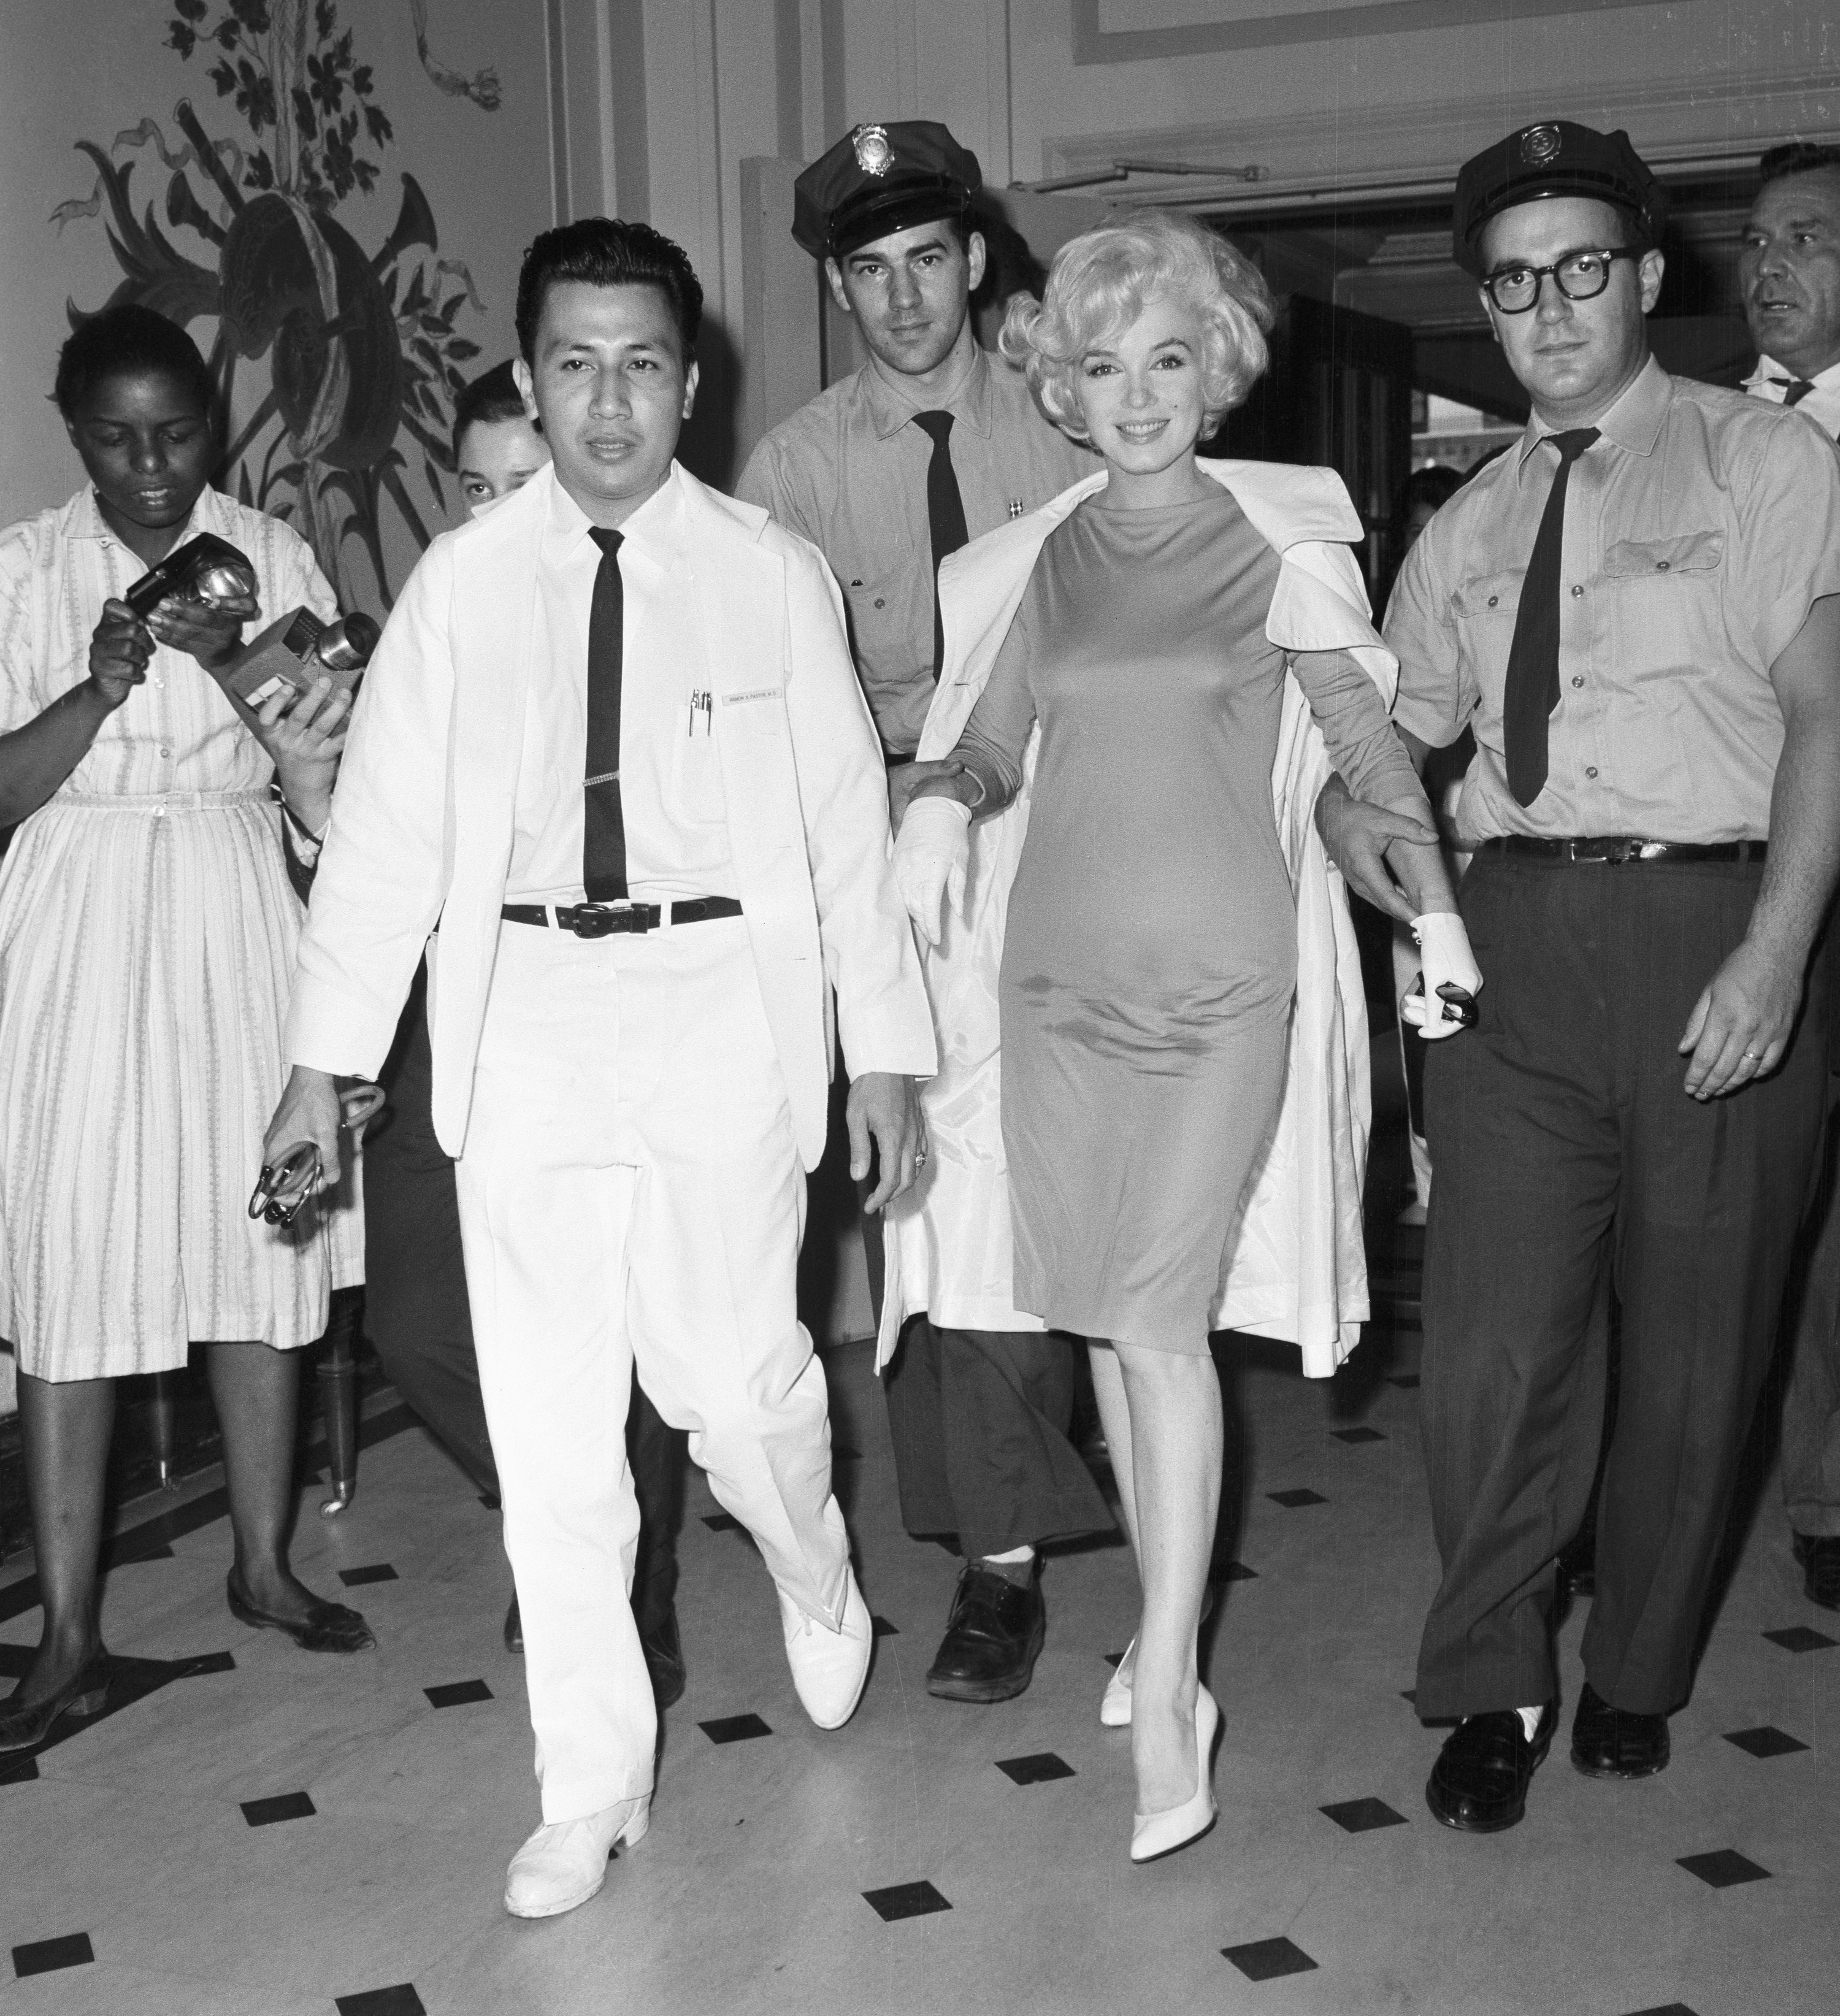 Marilyn walking with several men